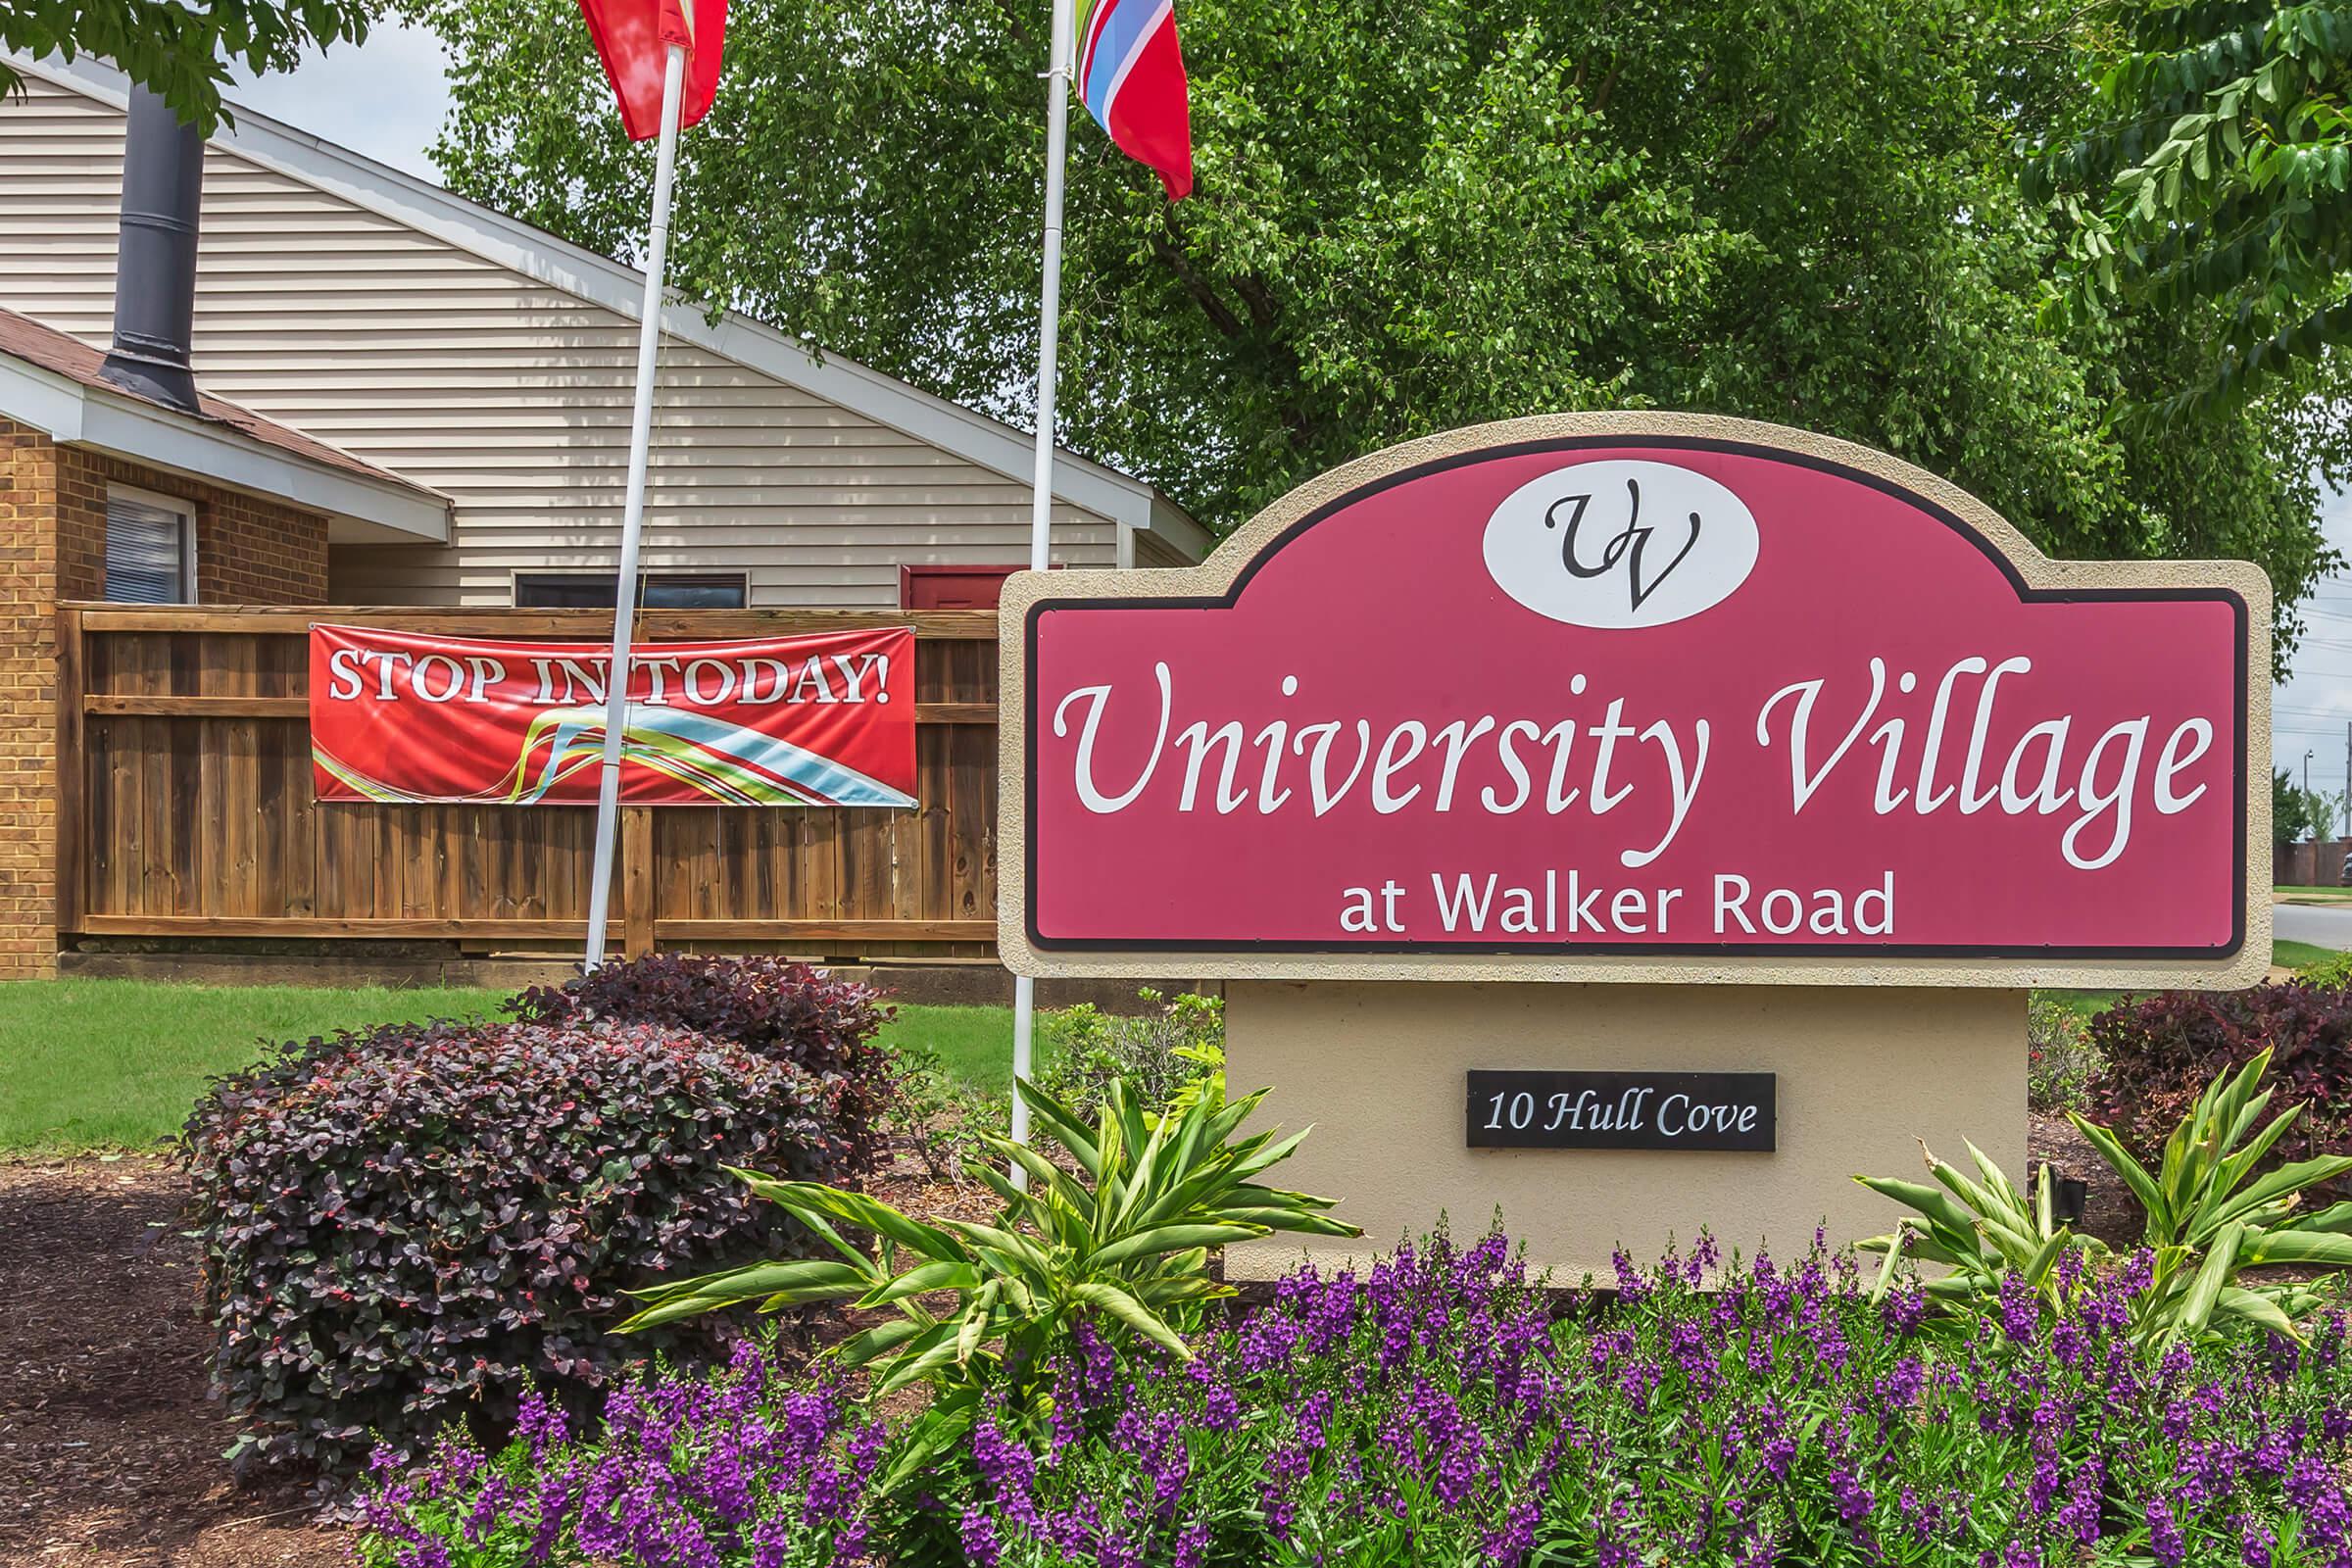 UNIVERSITY VILLAGE AT WALKER ROAD APARTMENTS FOR RENT IN JACKSON, TN